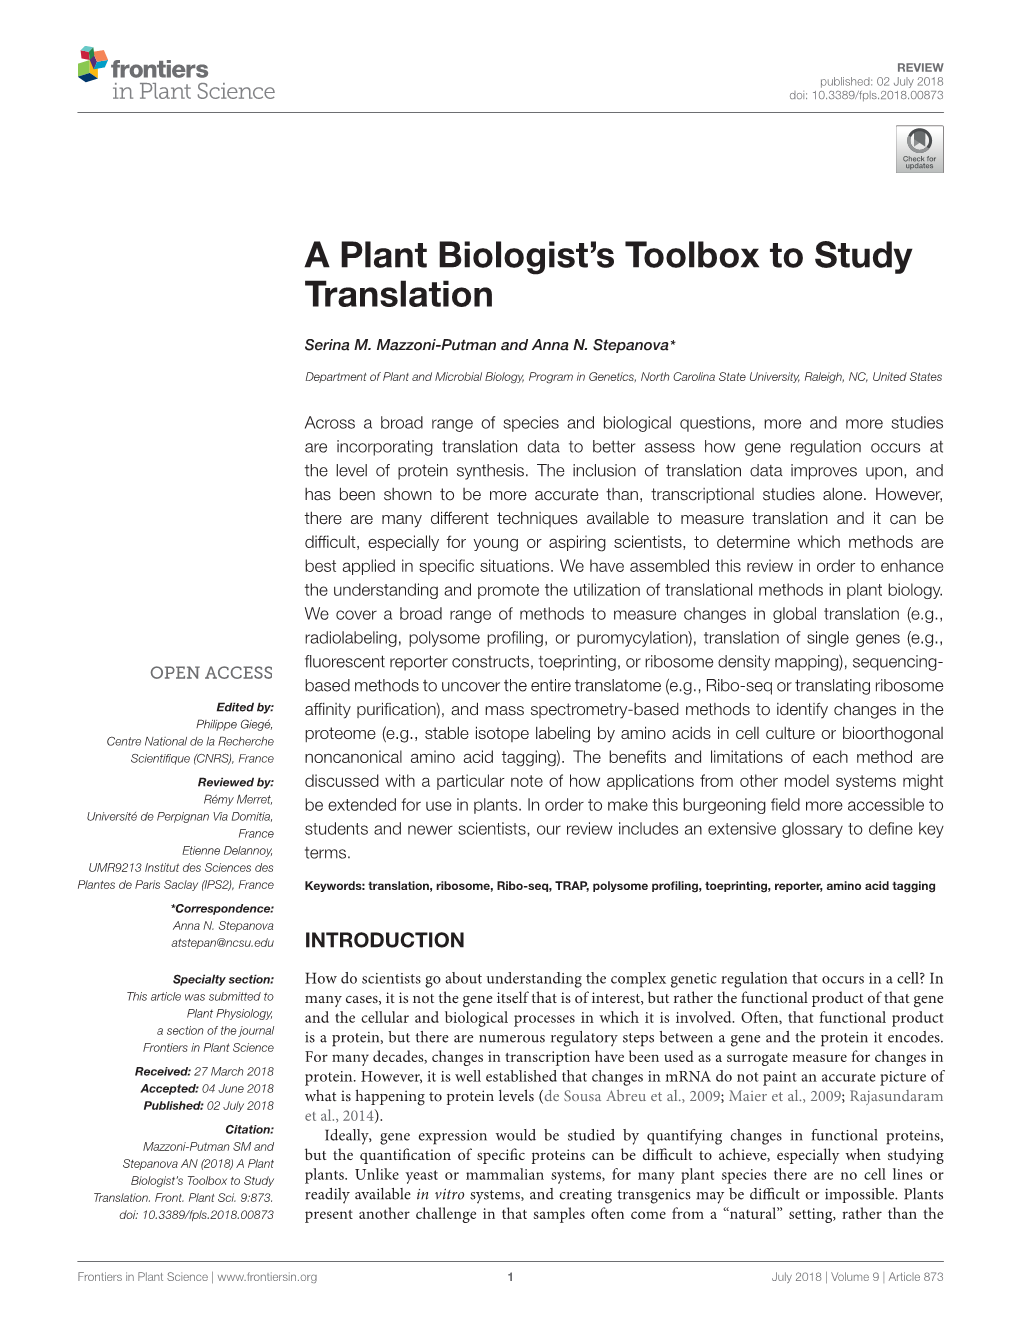 A Plant Biologist's Toolbox to Study Translation